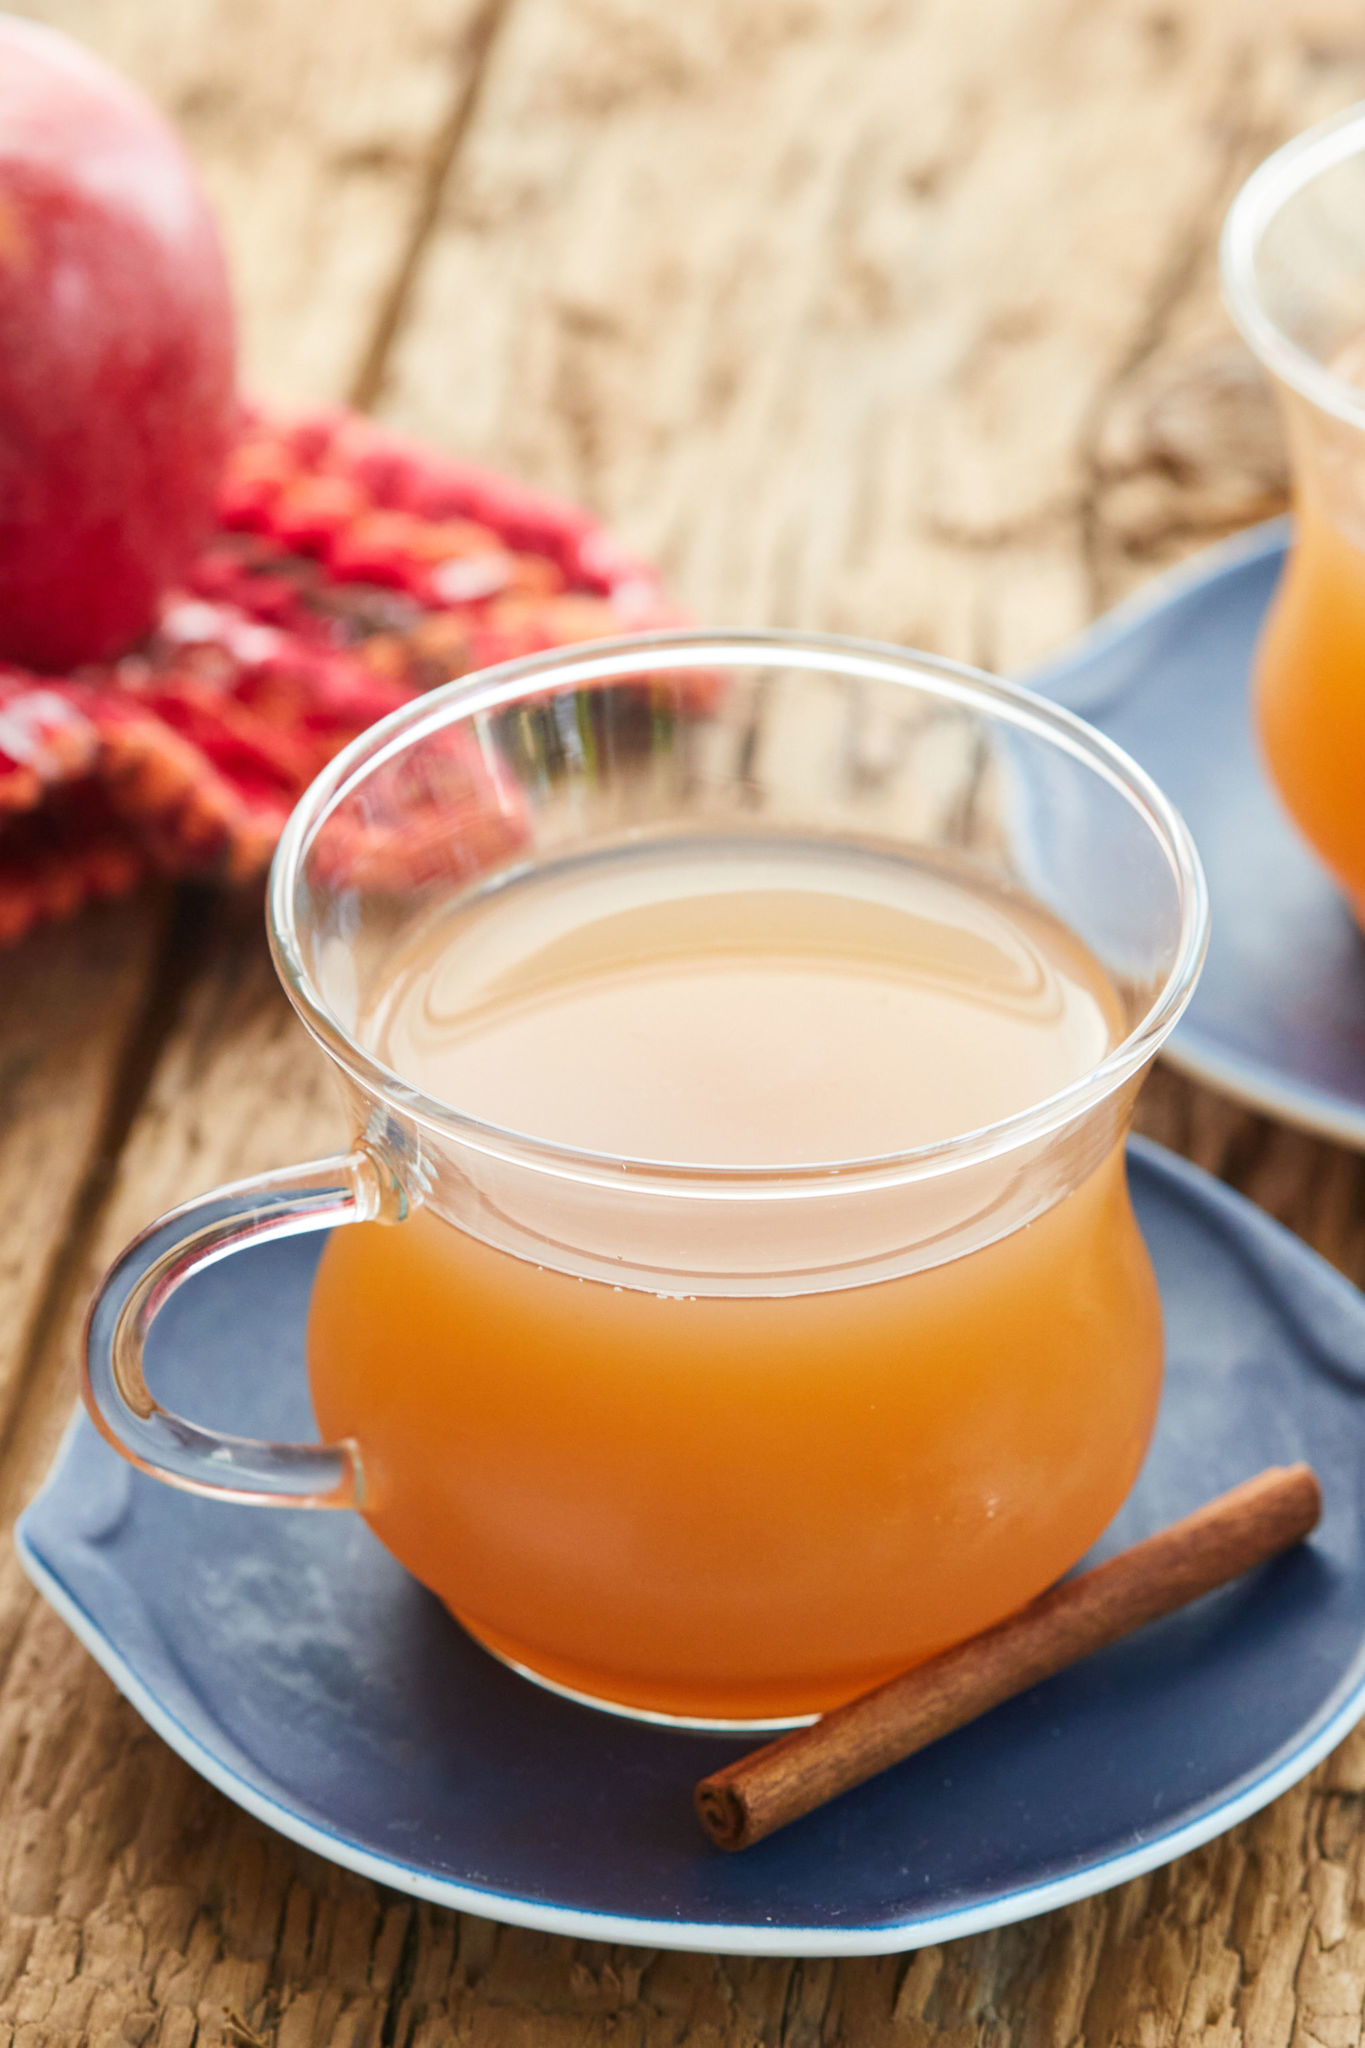 The perfect cup of homemade apple cider.